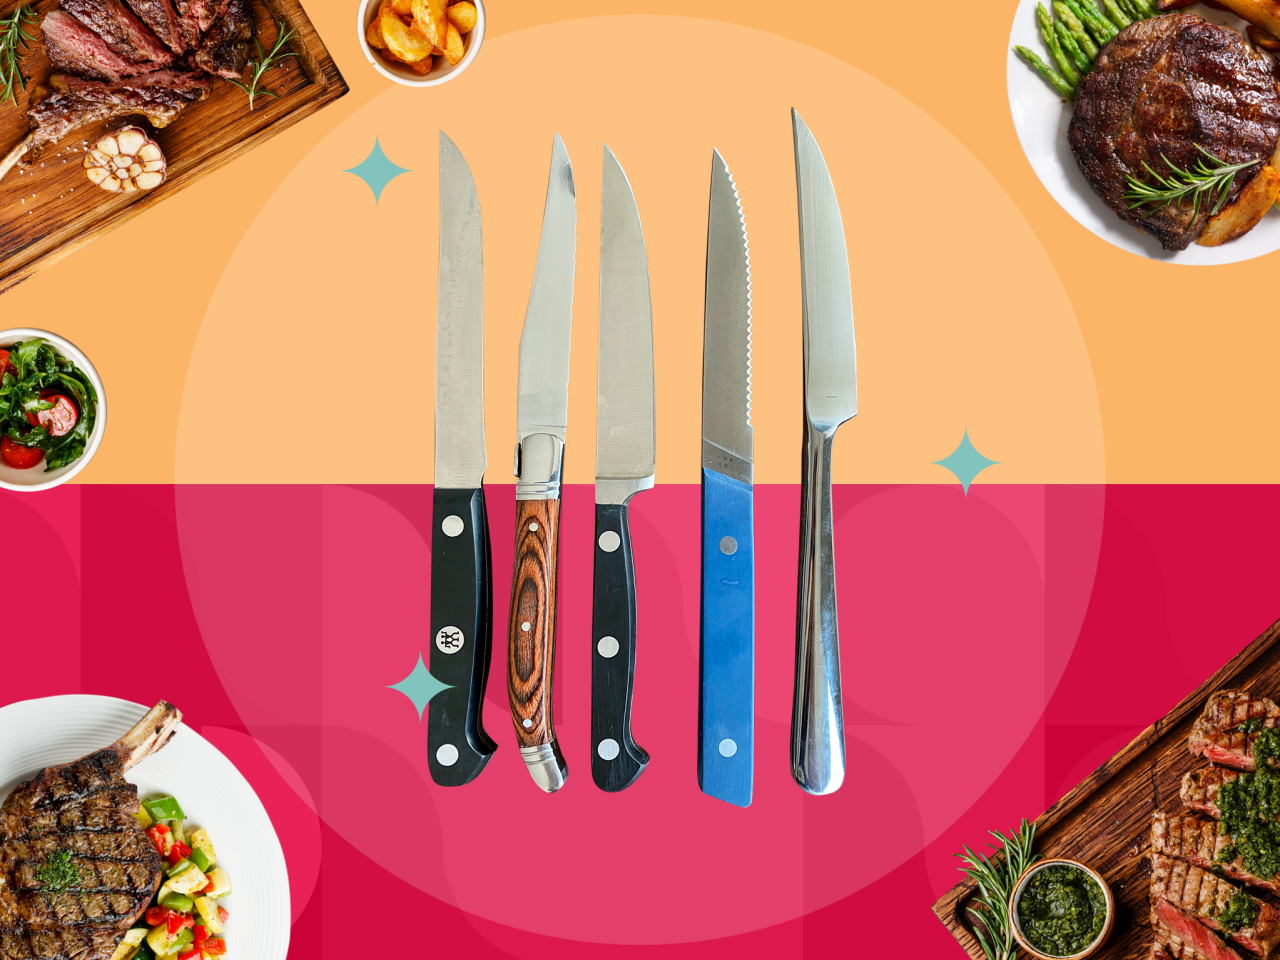 Astercook Steak Knife, Steak Knives Set of 6 with Sheath, Dishwasher Safe  High Carbon Stainless Steel Steak Knife with Cover, Black